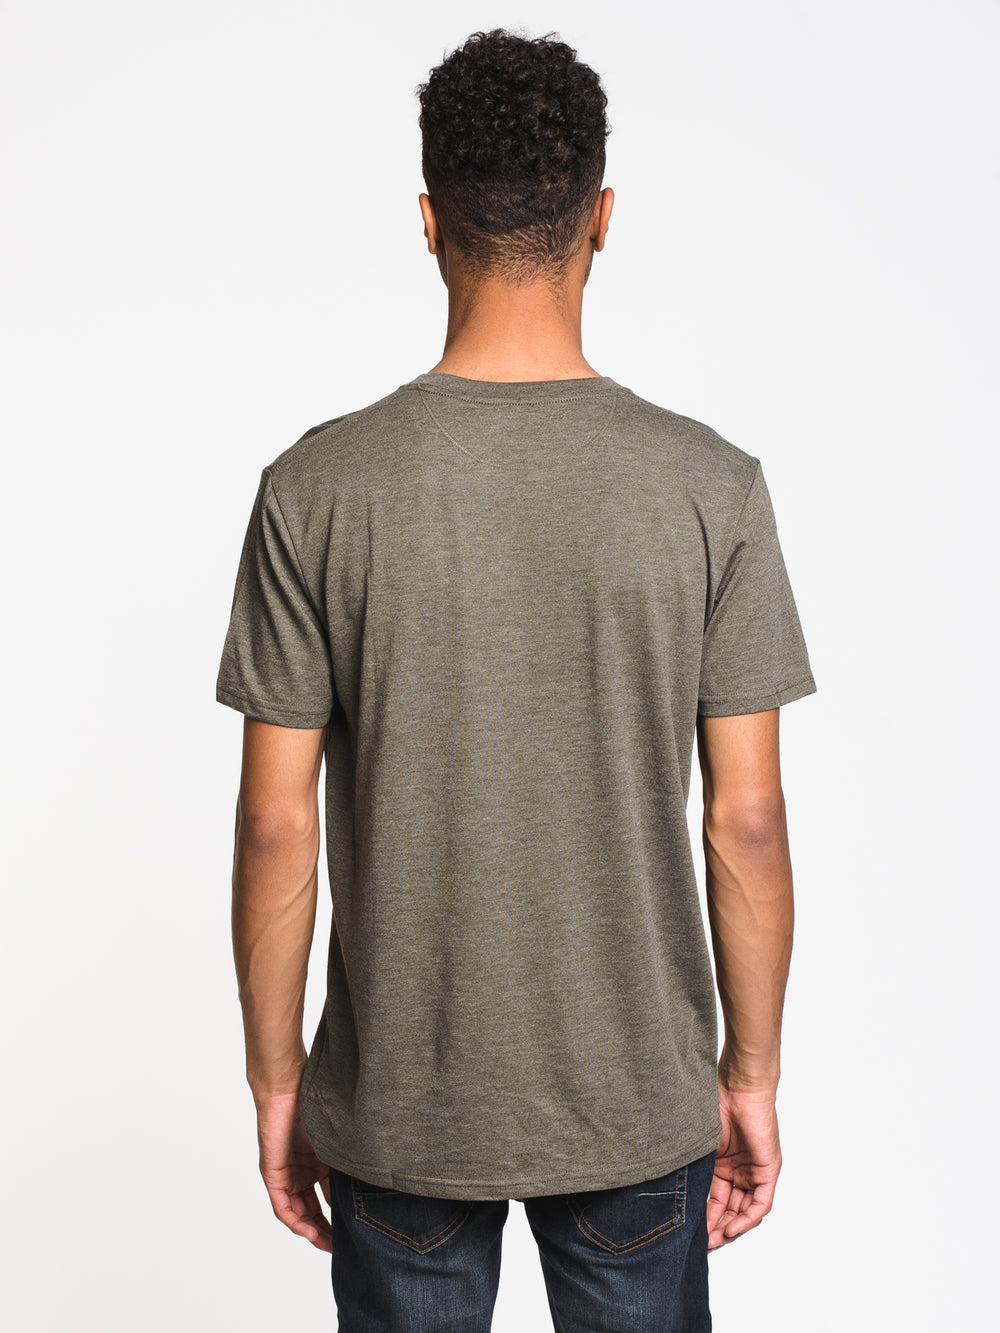 MENS SUPPORT CLASSIC T - OLIVE HTHR - CLEARANCE